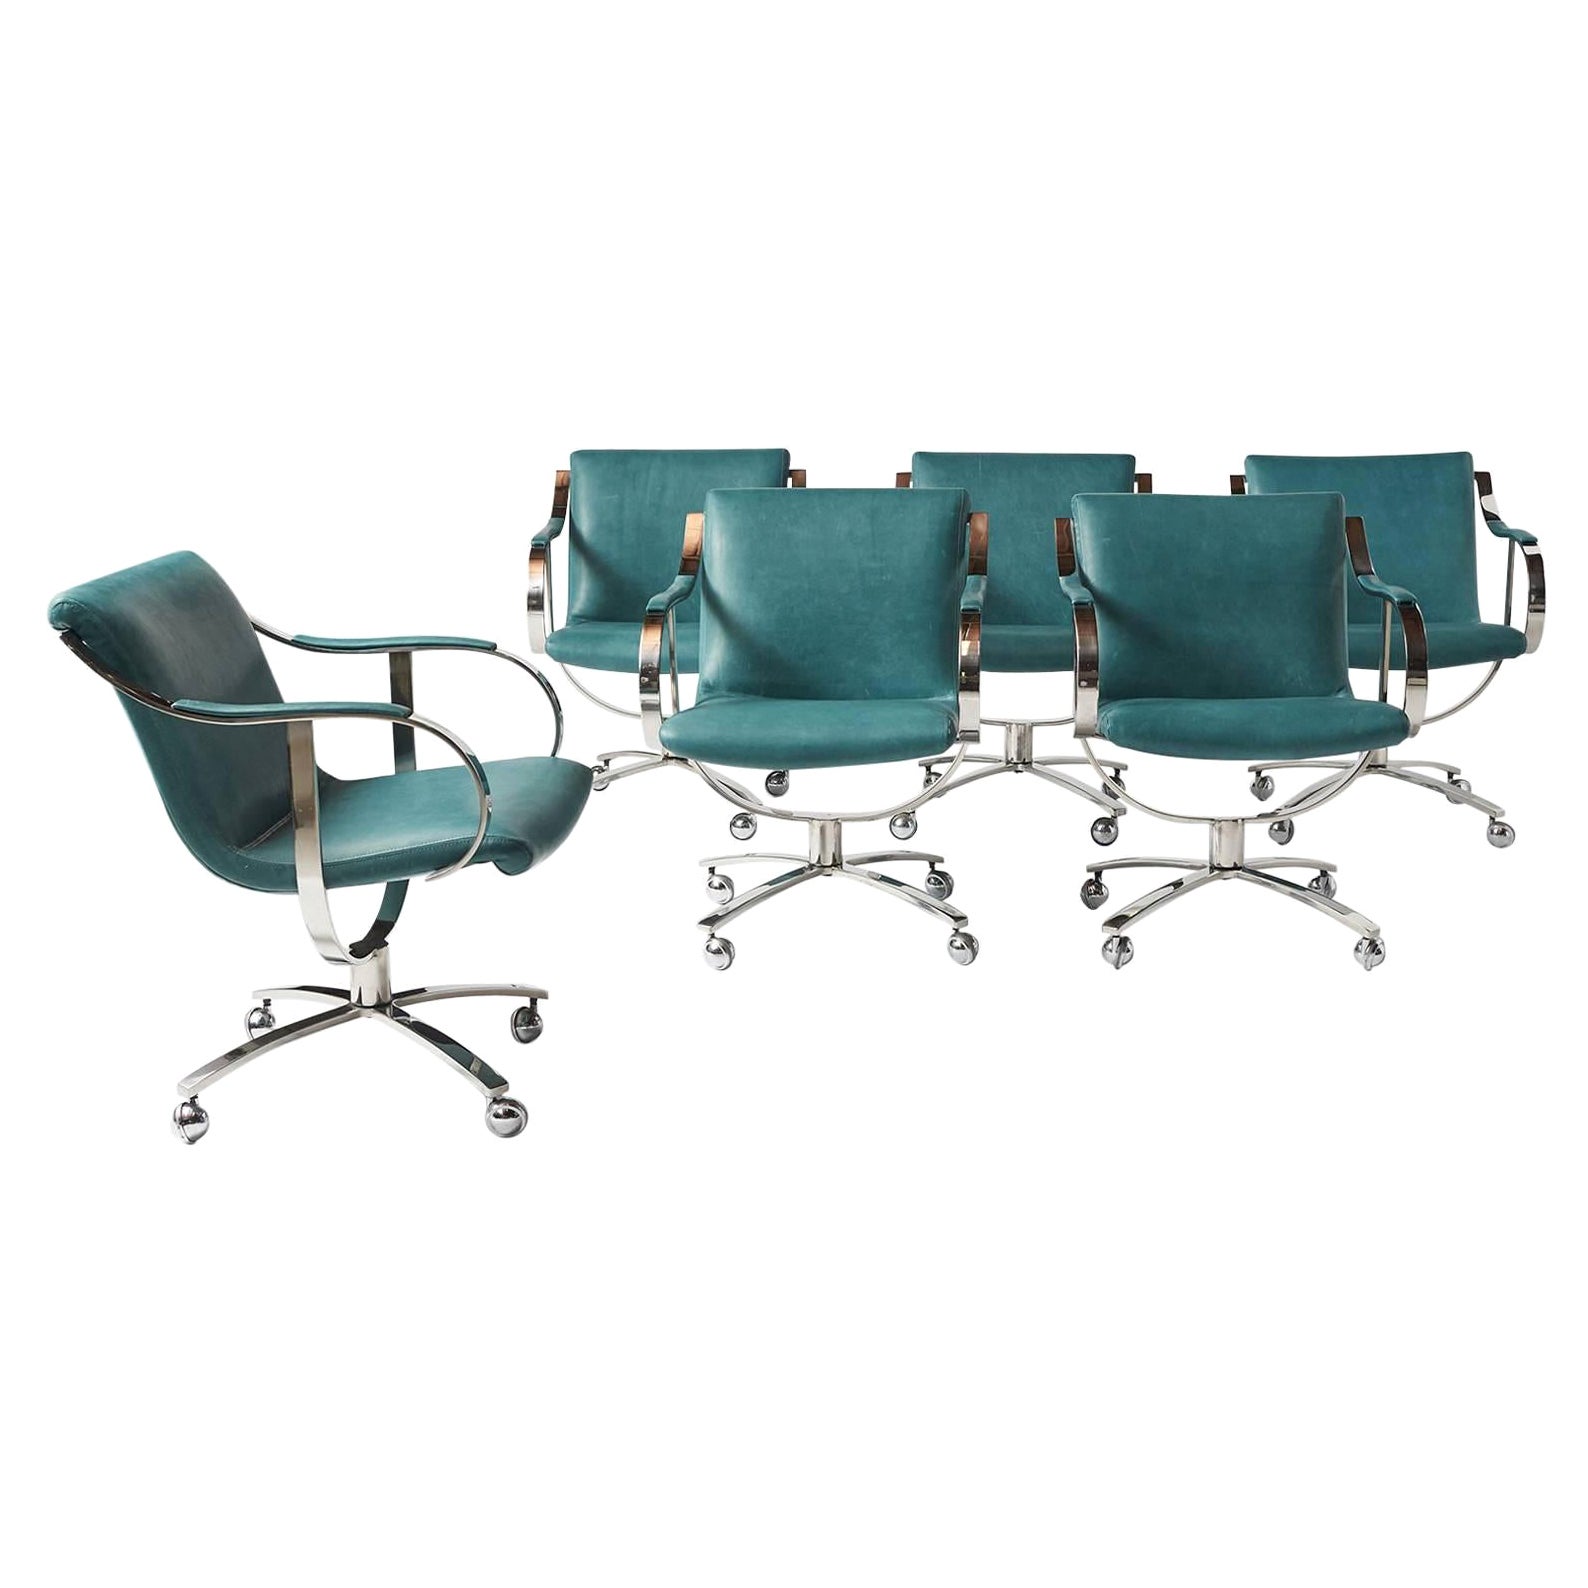 Swivel Chairs by Gardner Leaver for Steelcase